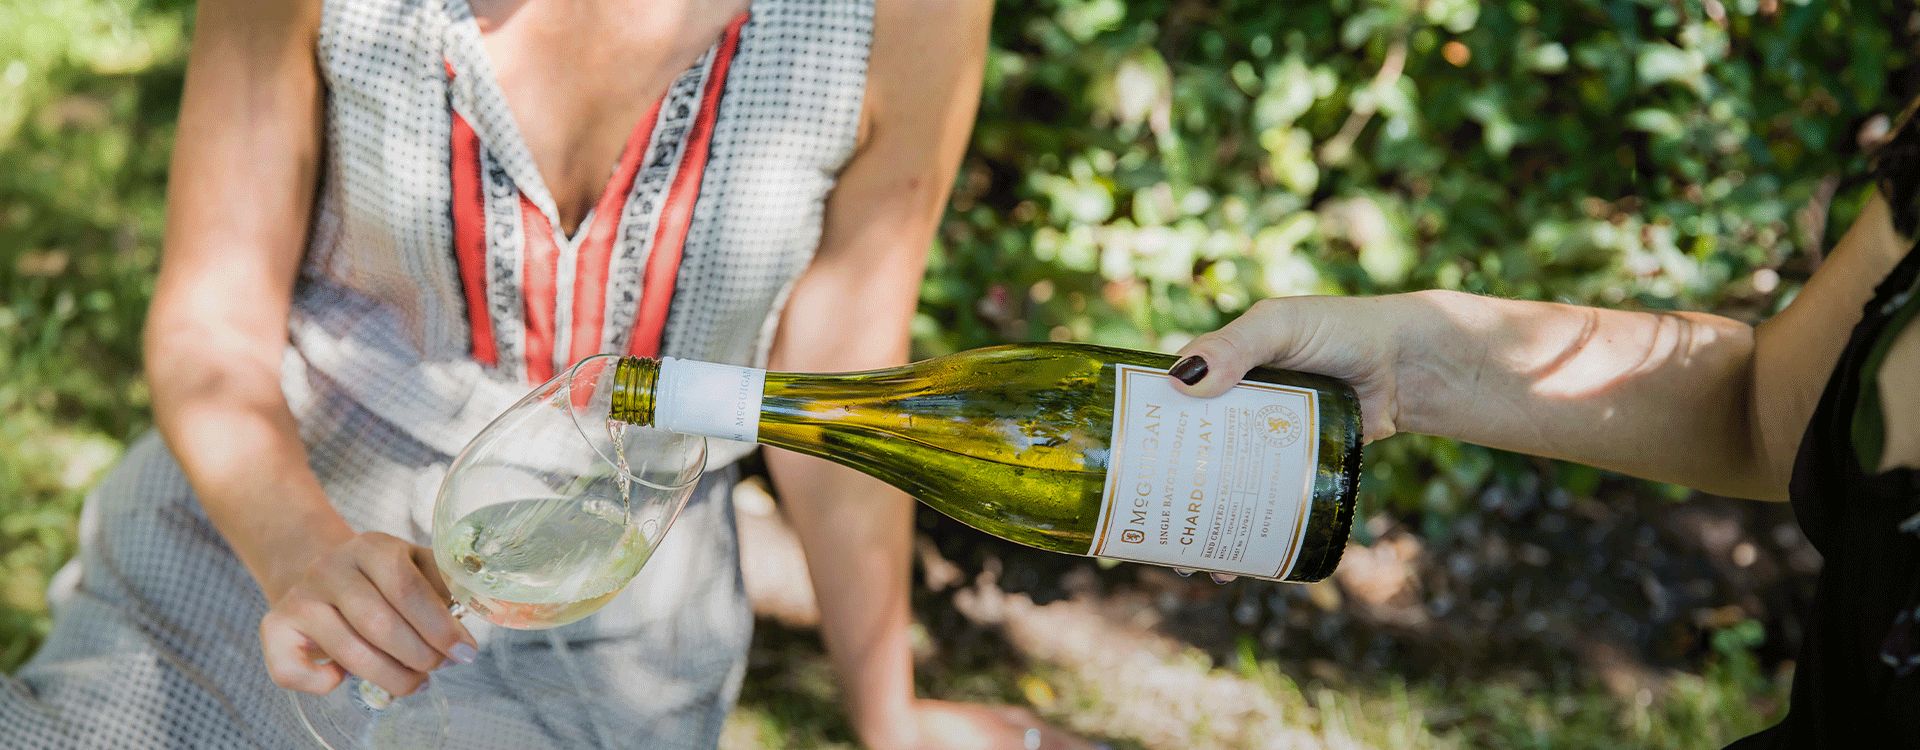 McGuigan Single Batch Chardonnay at a Picnic being poured into a glass